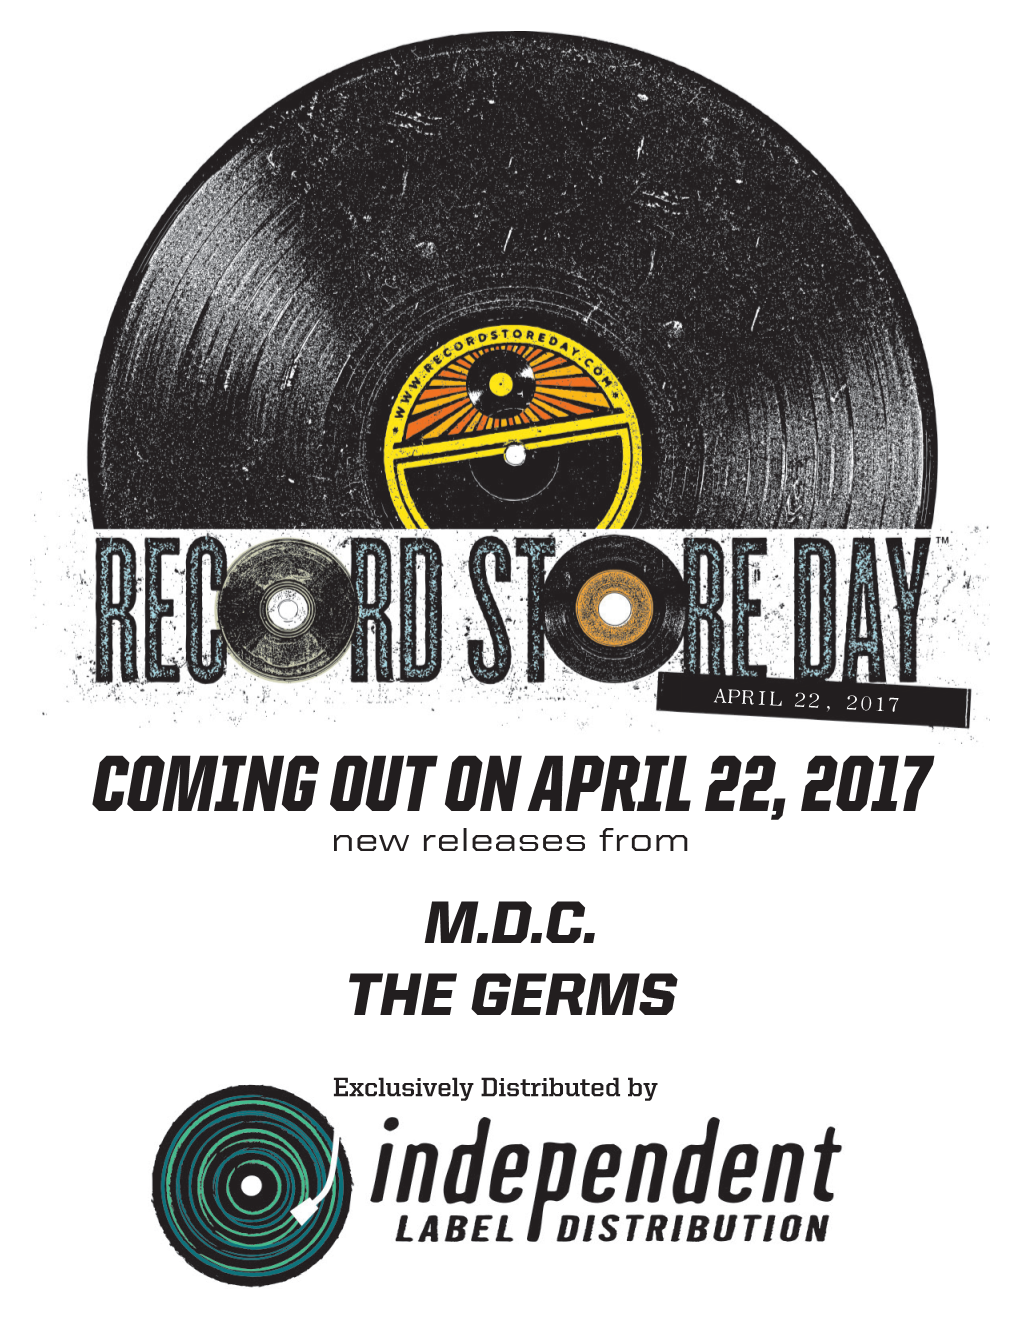 COMING out on APRIL 22, 2017 New Releases from M.D.C